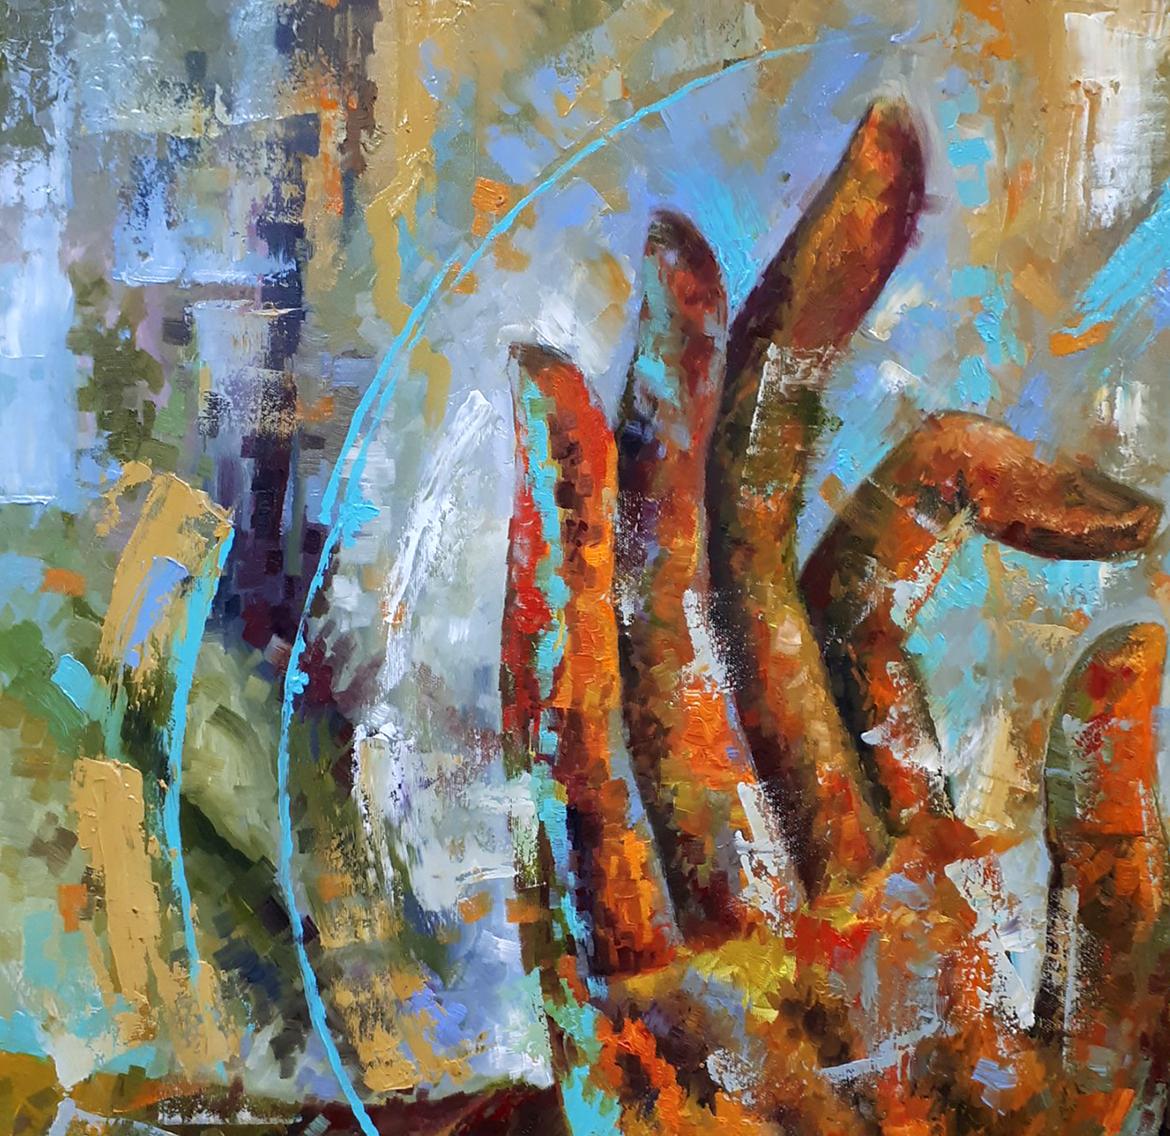 The artwork captures the symbolic significance of Buddha's hand in oil